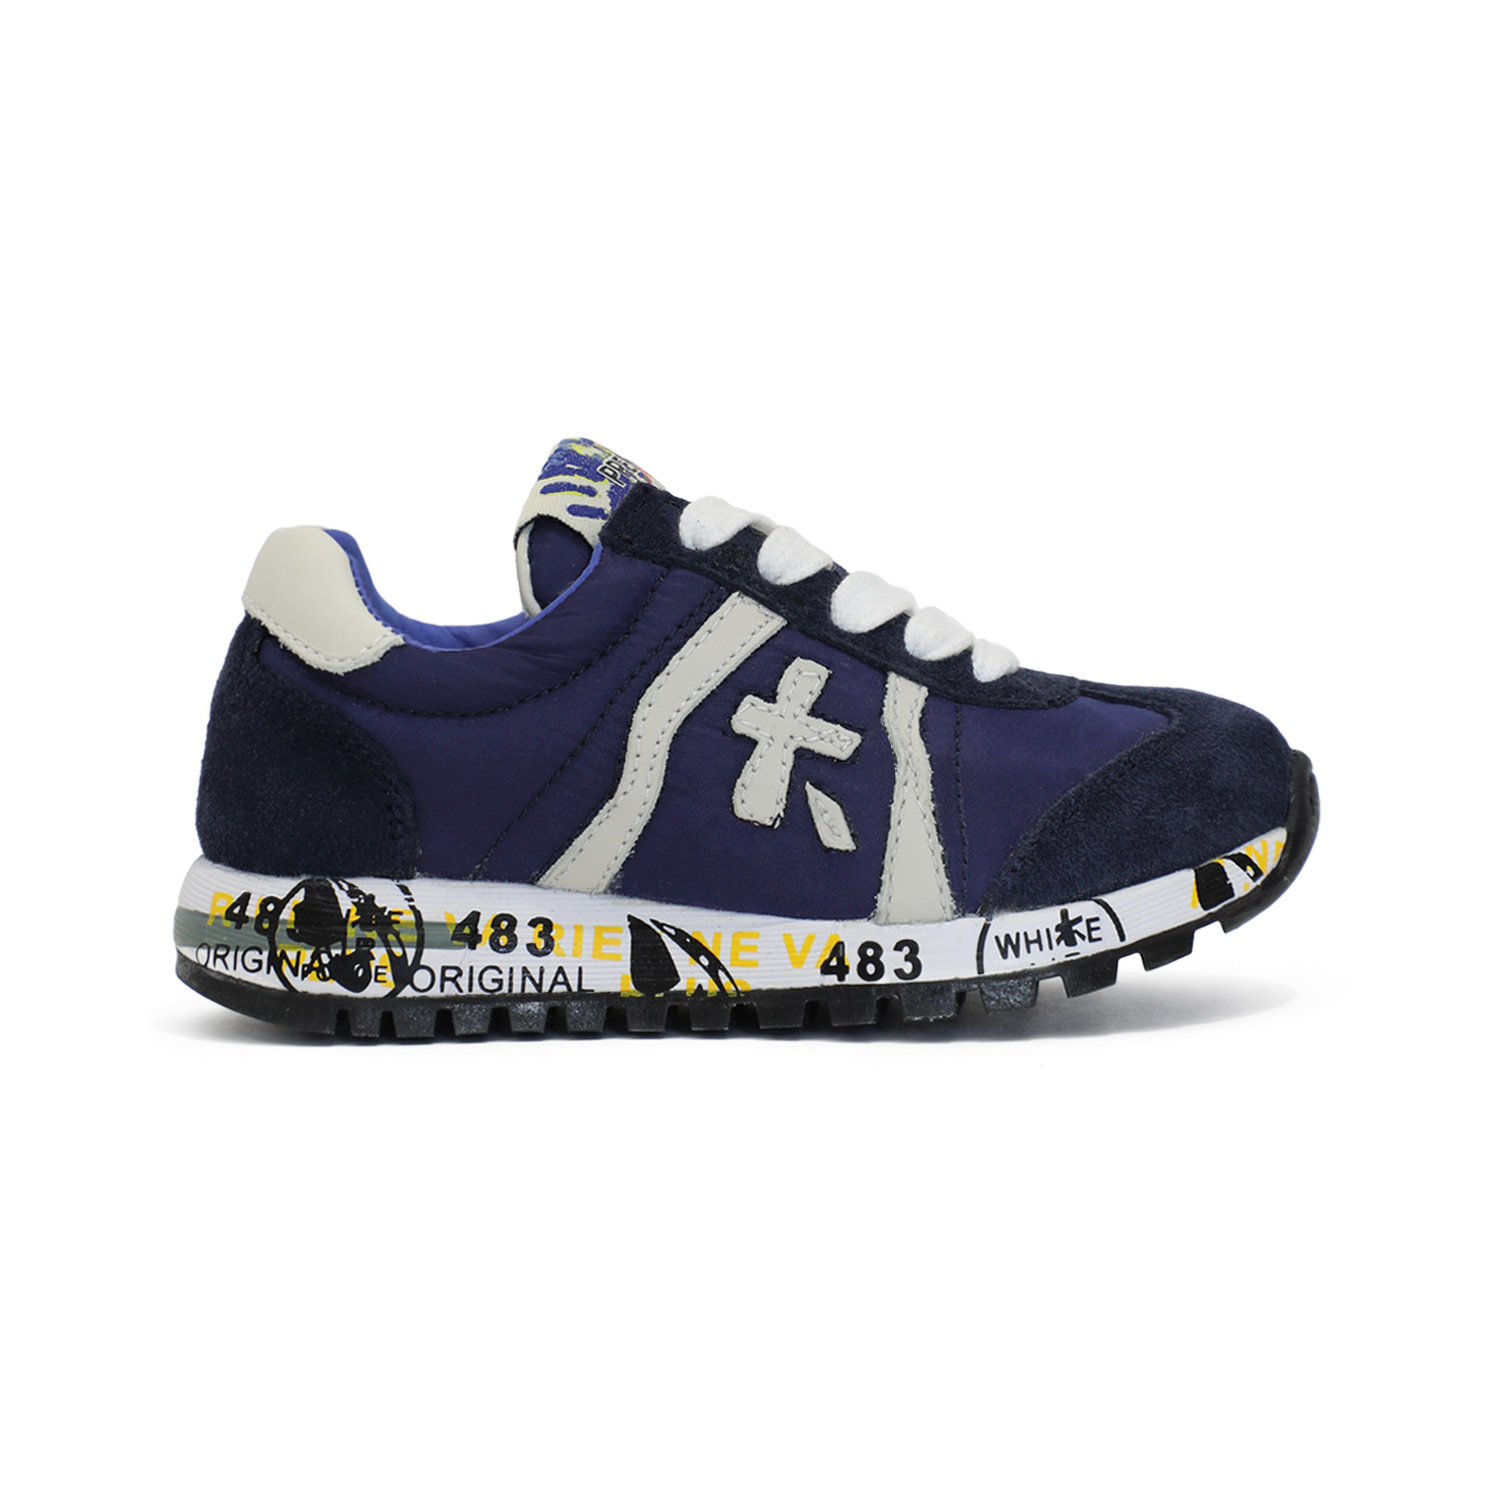 Premiata will be Lucy navy and white sneaker Sydney AU